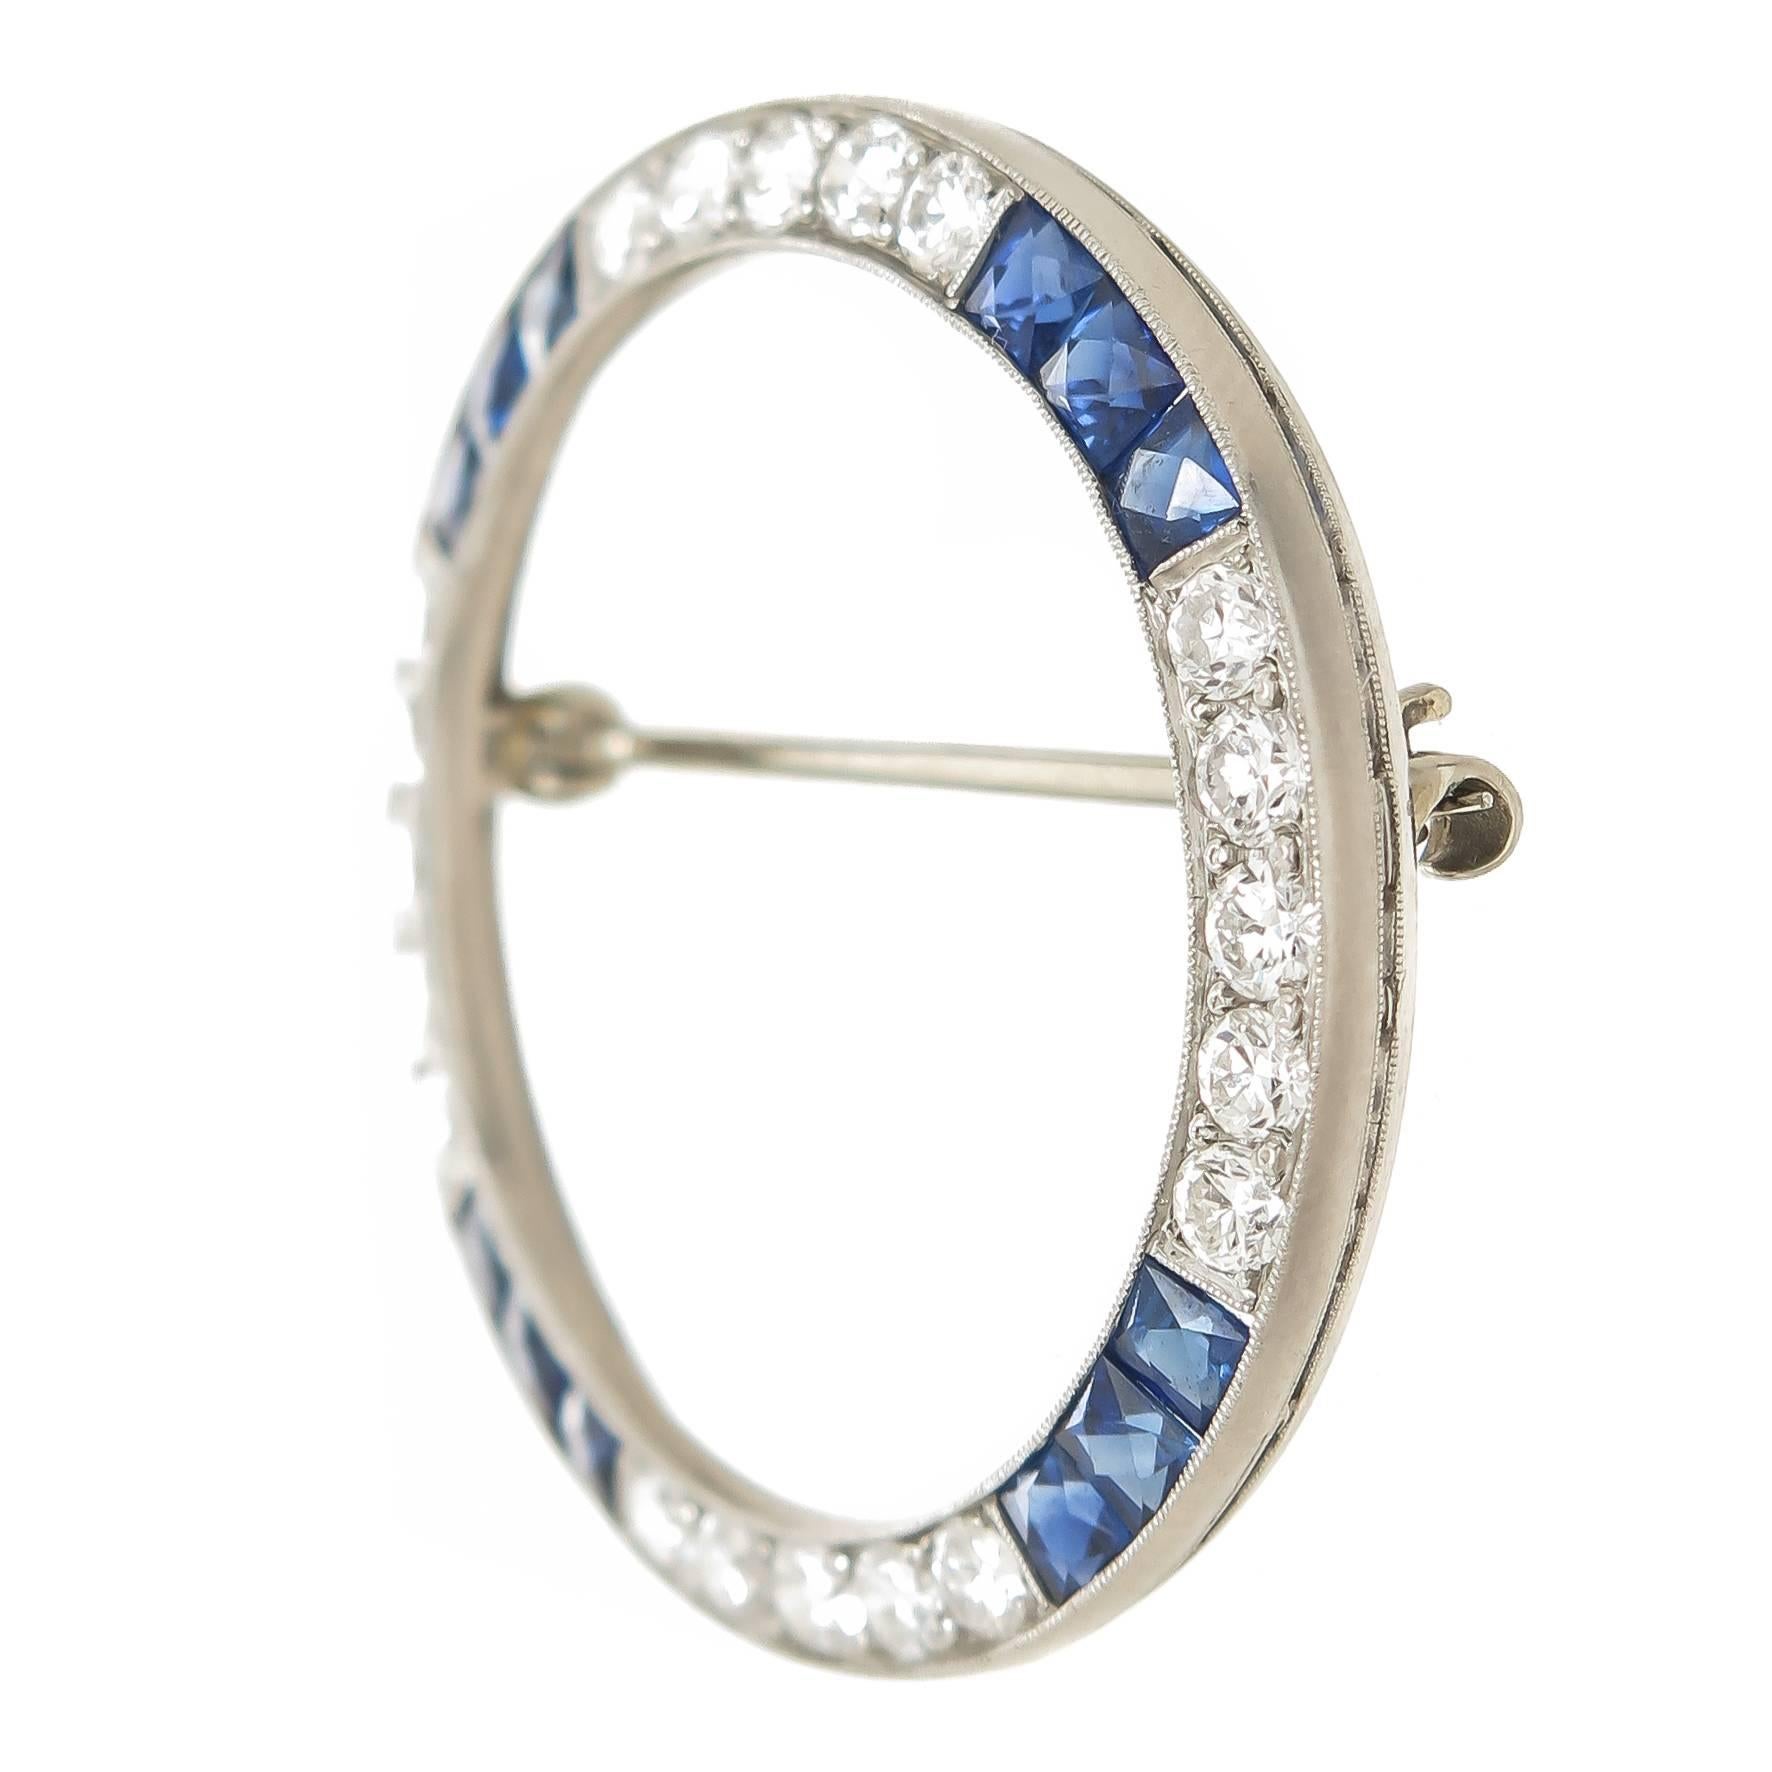 Circa 1960s Oscar Heyman Platinum Circle Brooch, set with Round Brilliant cut Diamonds totaling 1 Carat and Fine color French cut sapphires. The brooch measures 1 3/8 inch in diameter. 